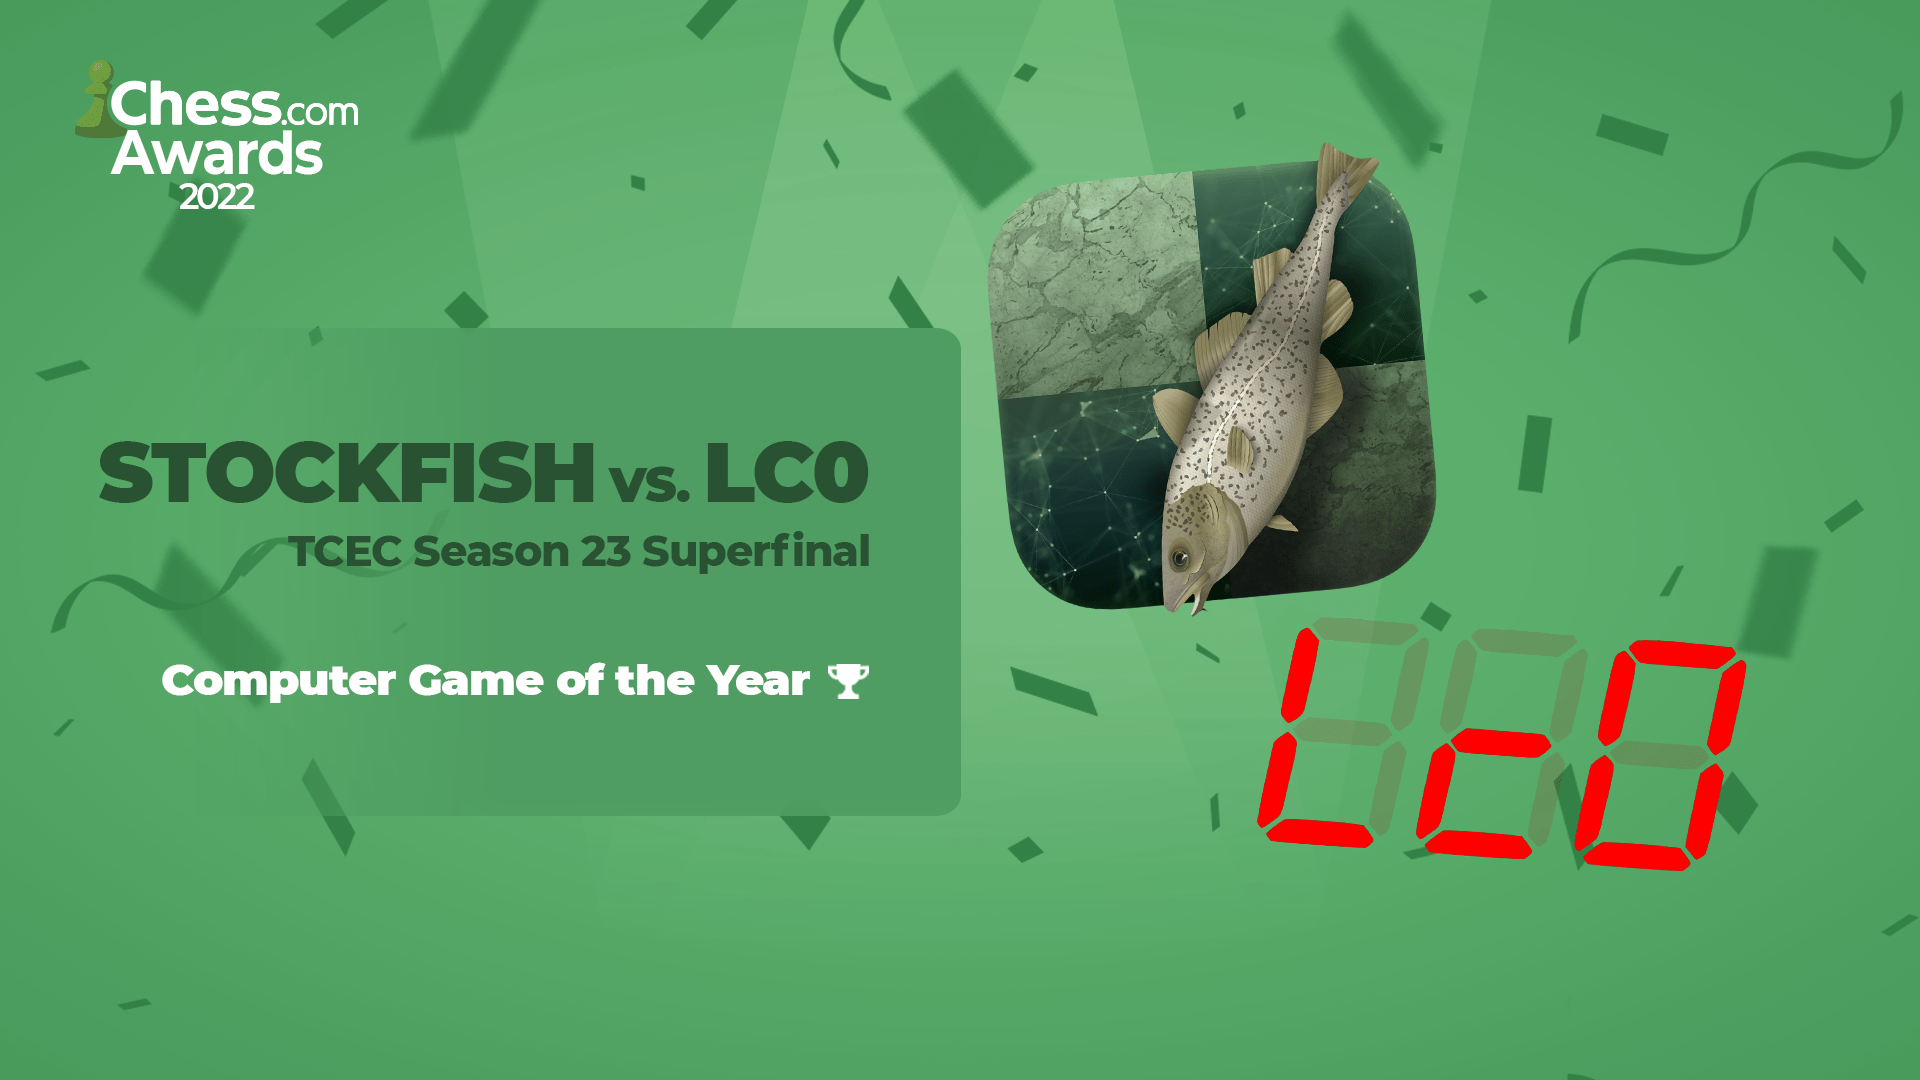 2022 Chess.com Awards Winners Computer Game of the Year Stockfish vs. Lc0